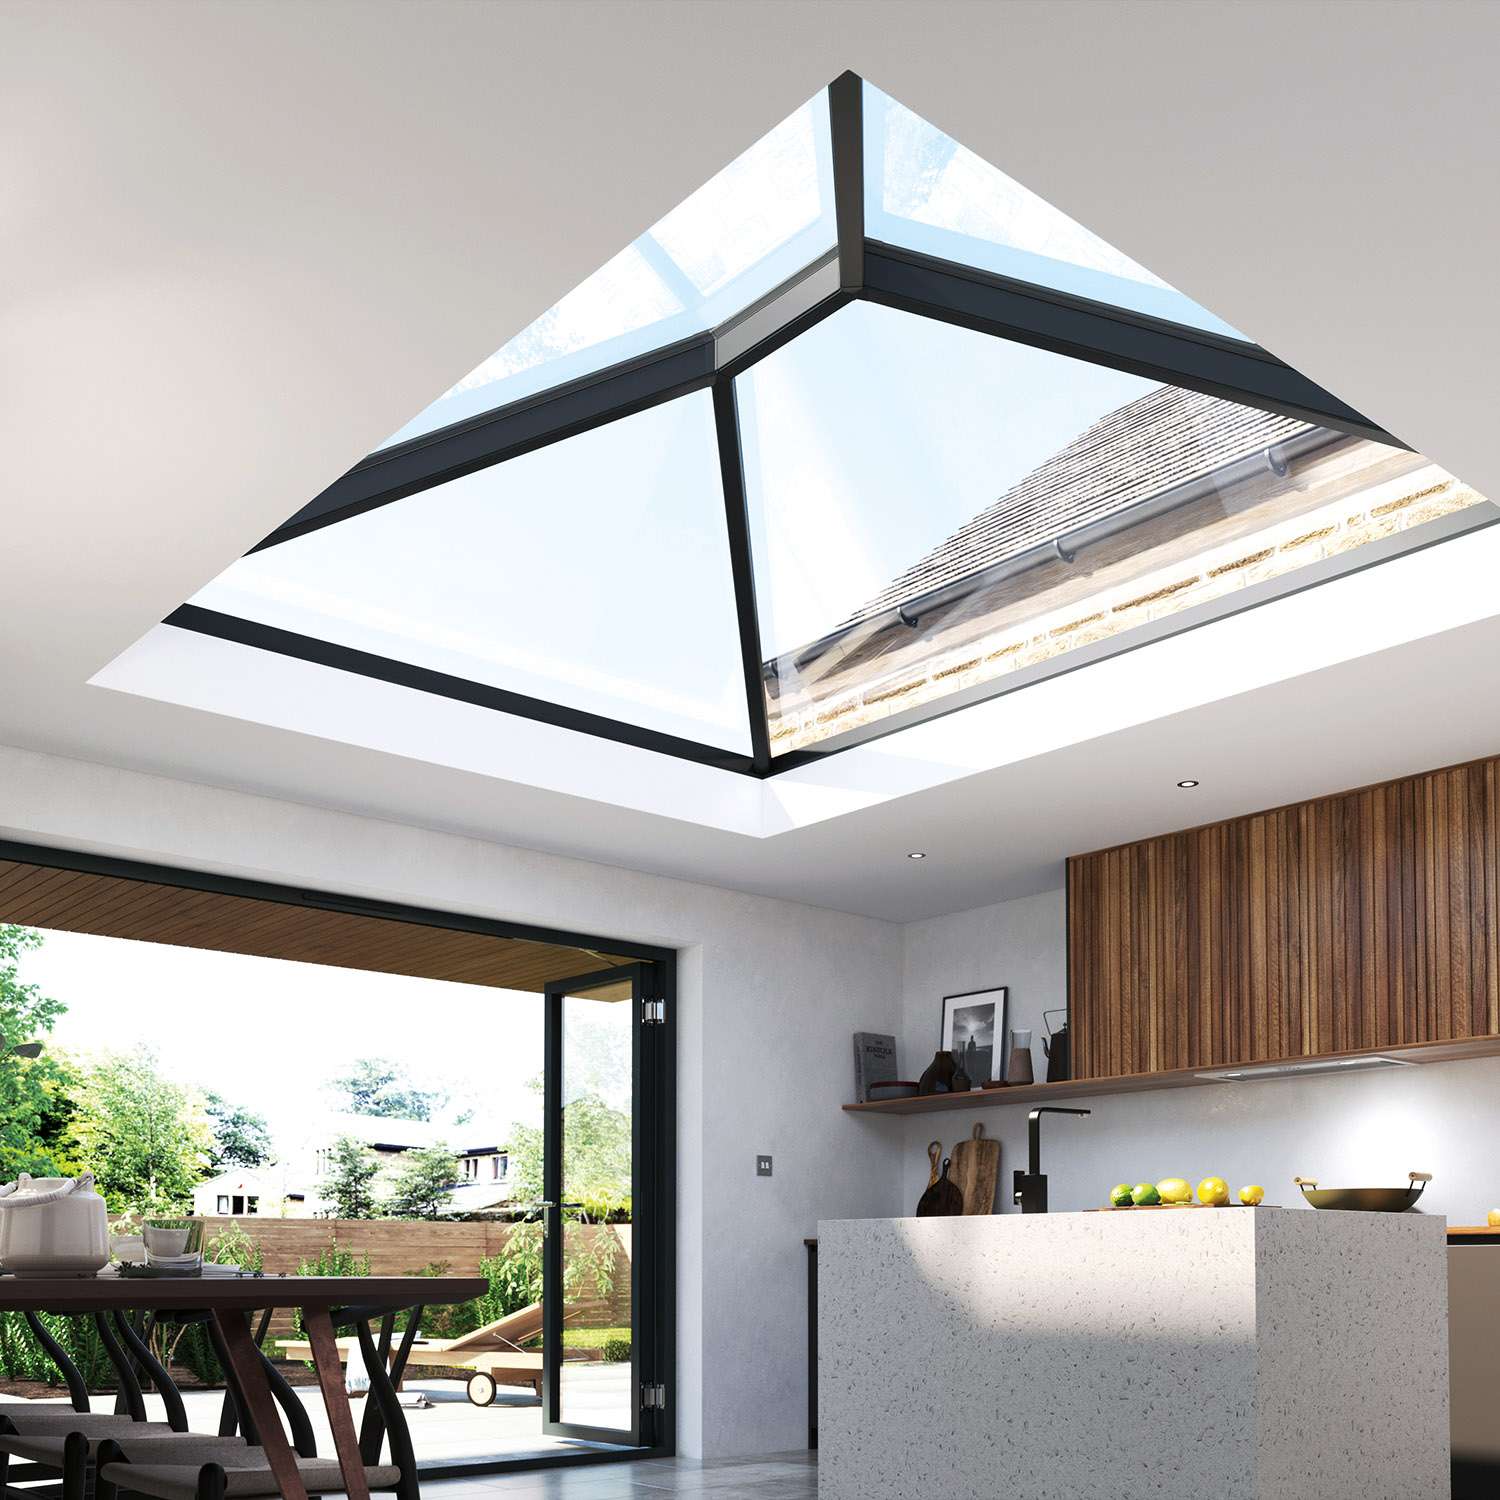 A modern kitchen with a large roof Korniche roof lantern installed in the roof. Bifold doors open out into a garden, where a deckchair is situated on the pavement.